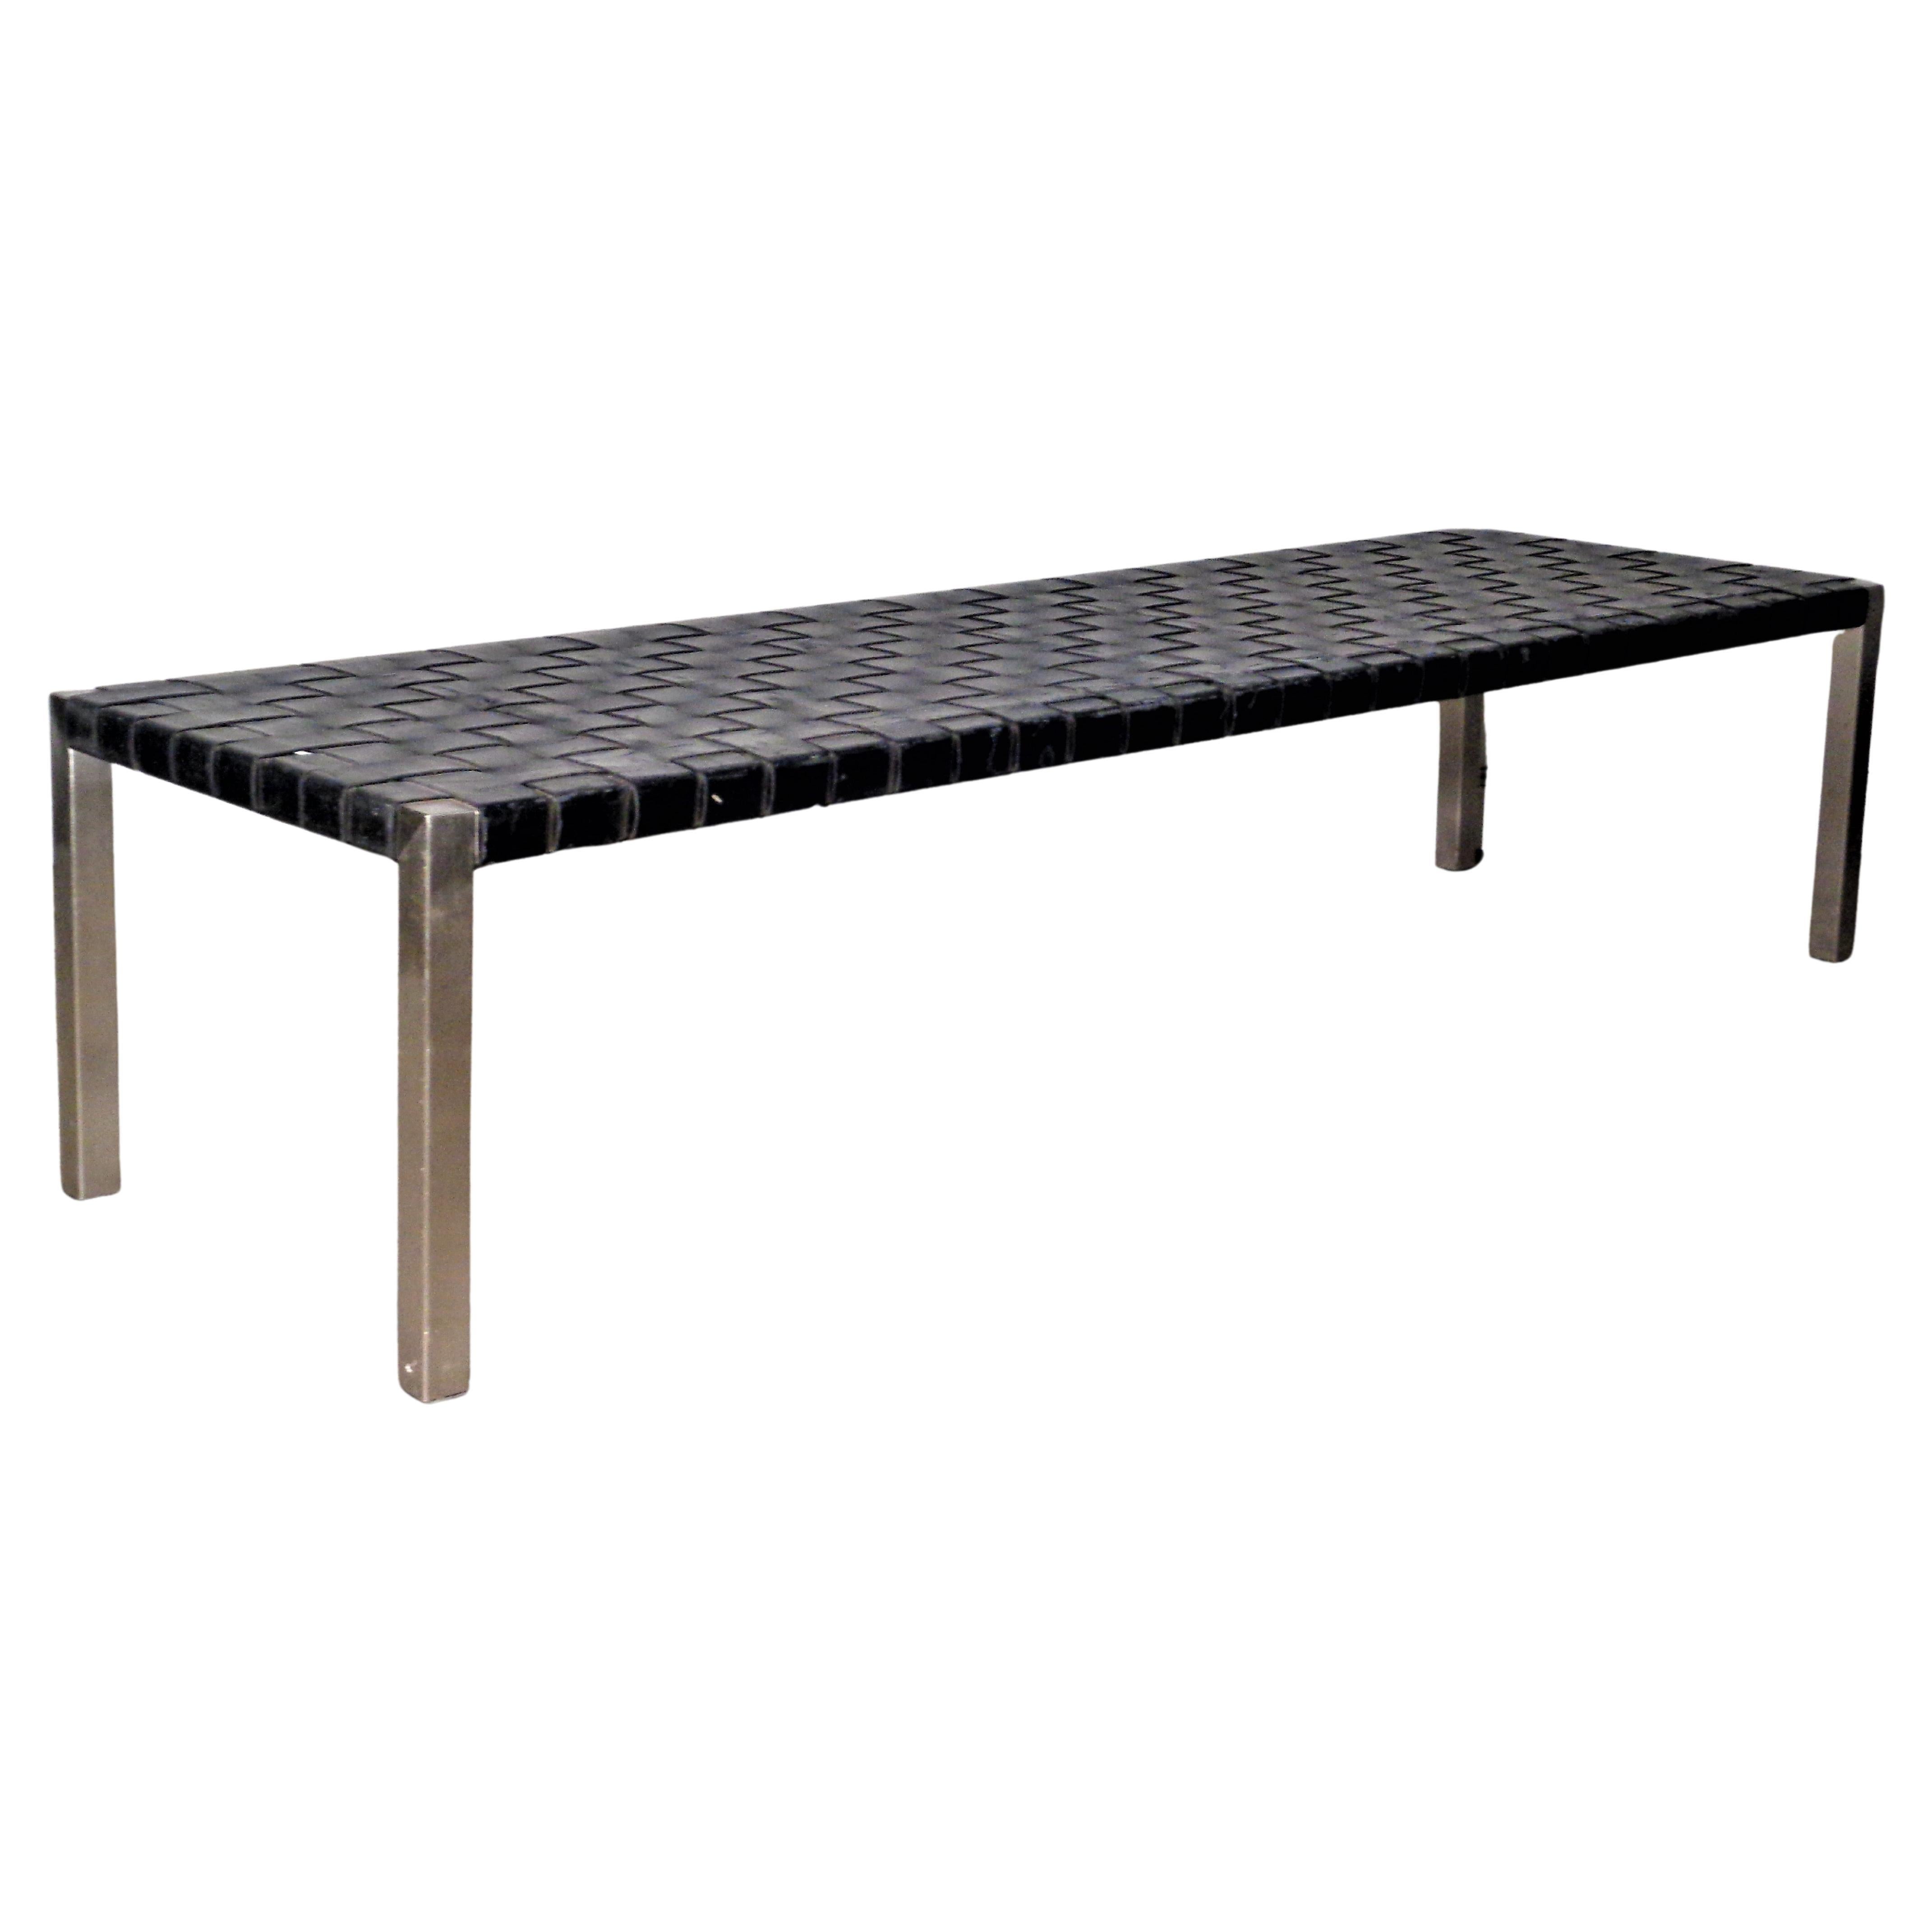 Stainless Steel and Woven Leather Long Bench by Ralph Lauren, Circa 1980